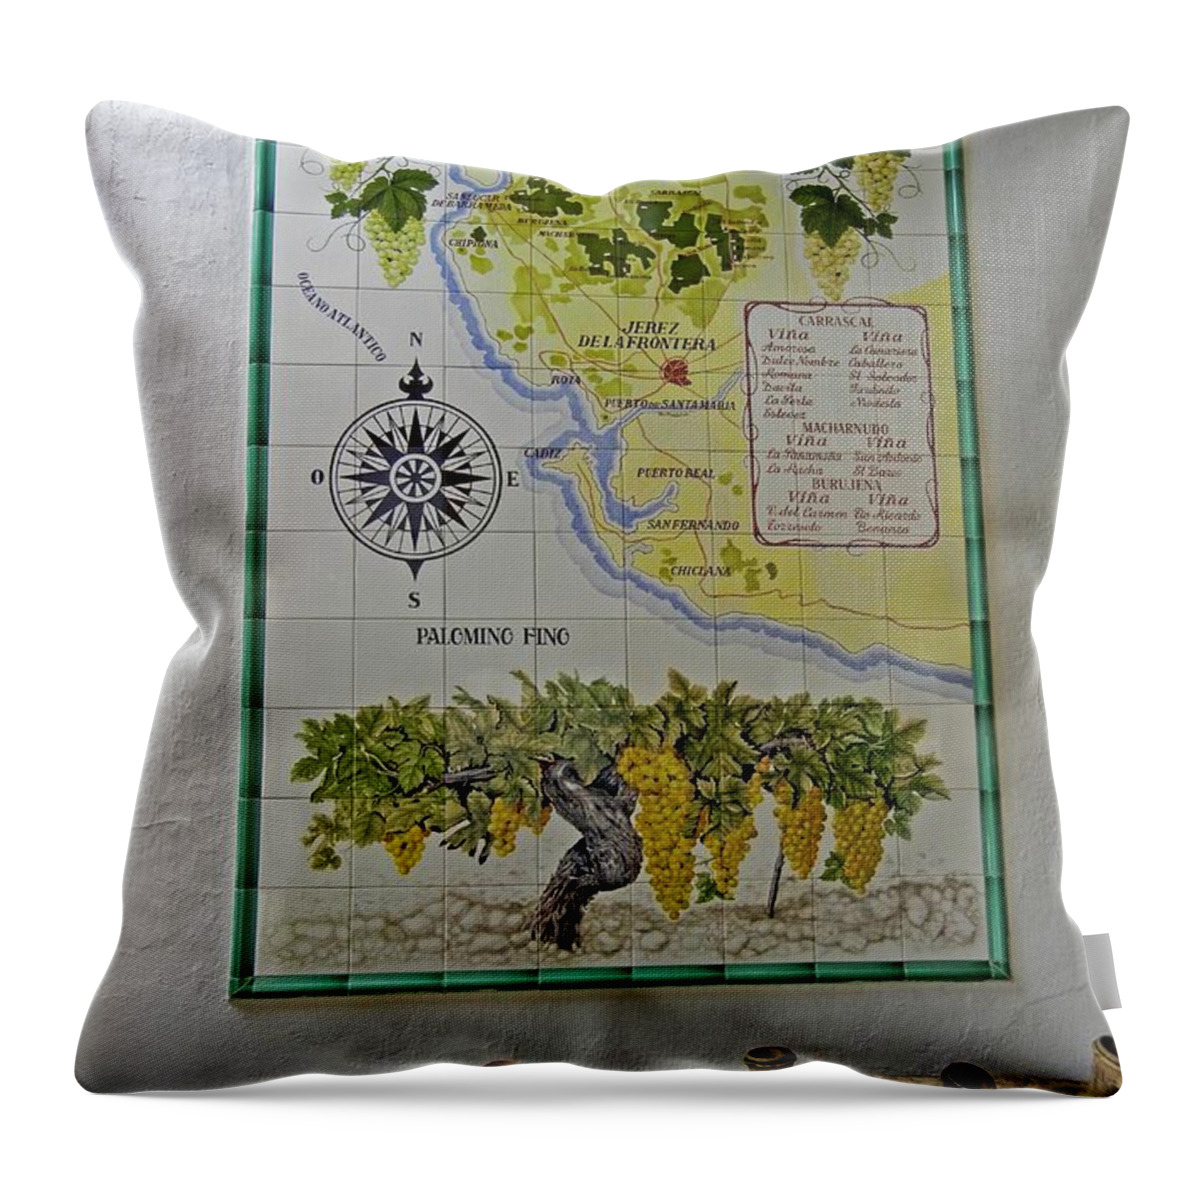 Europe Throw Pillow featuring the photograph Vinedos Tio Pepe - Jerez de la Frontera by Juergen Weiss